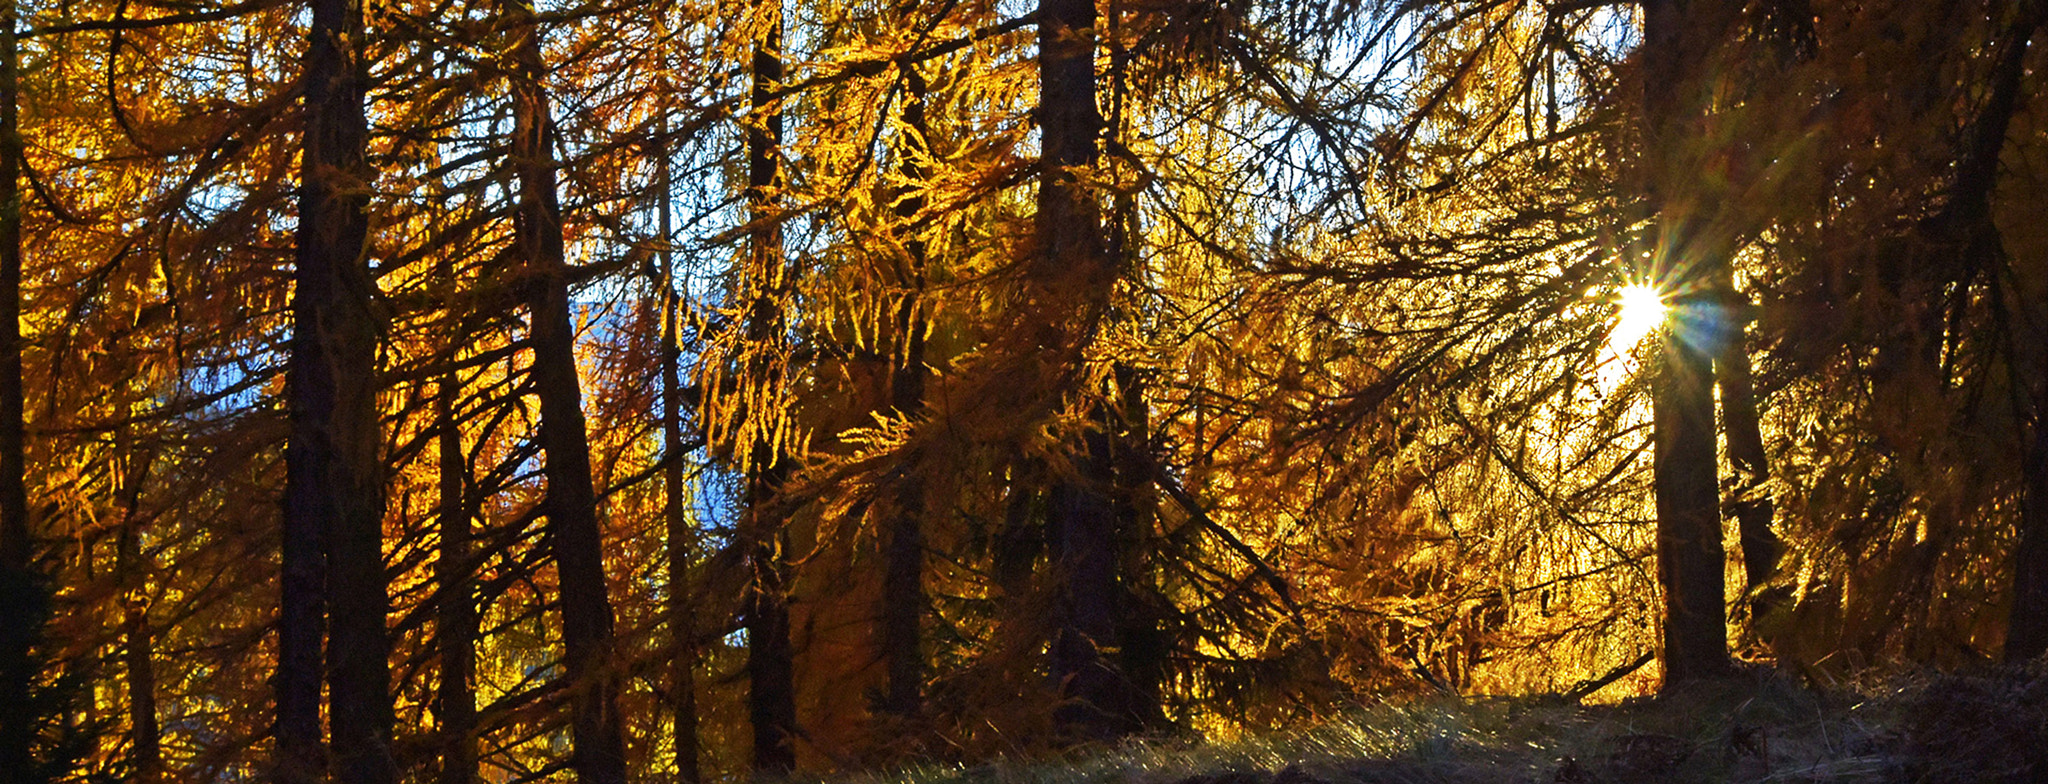 Nikon 1 V3 sample photo. Autumn - the gold of the larches photography